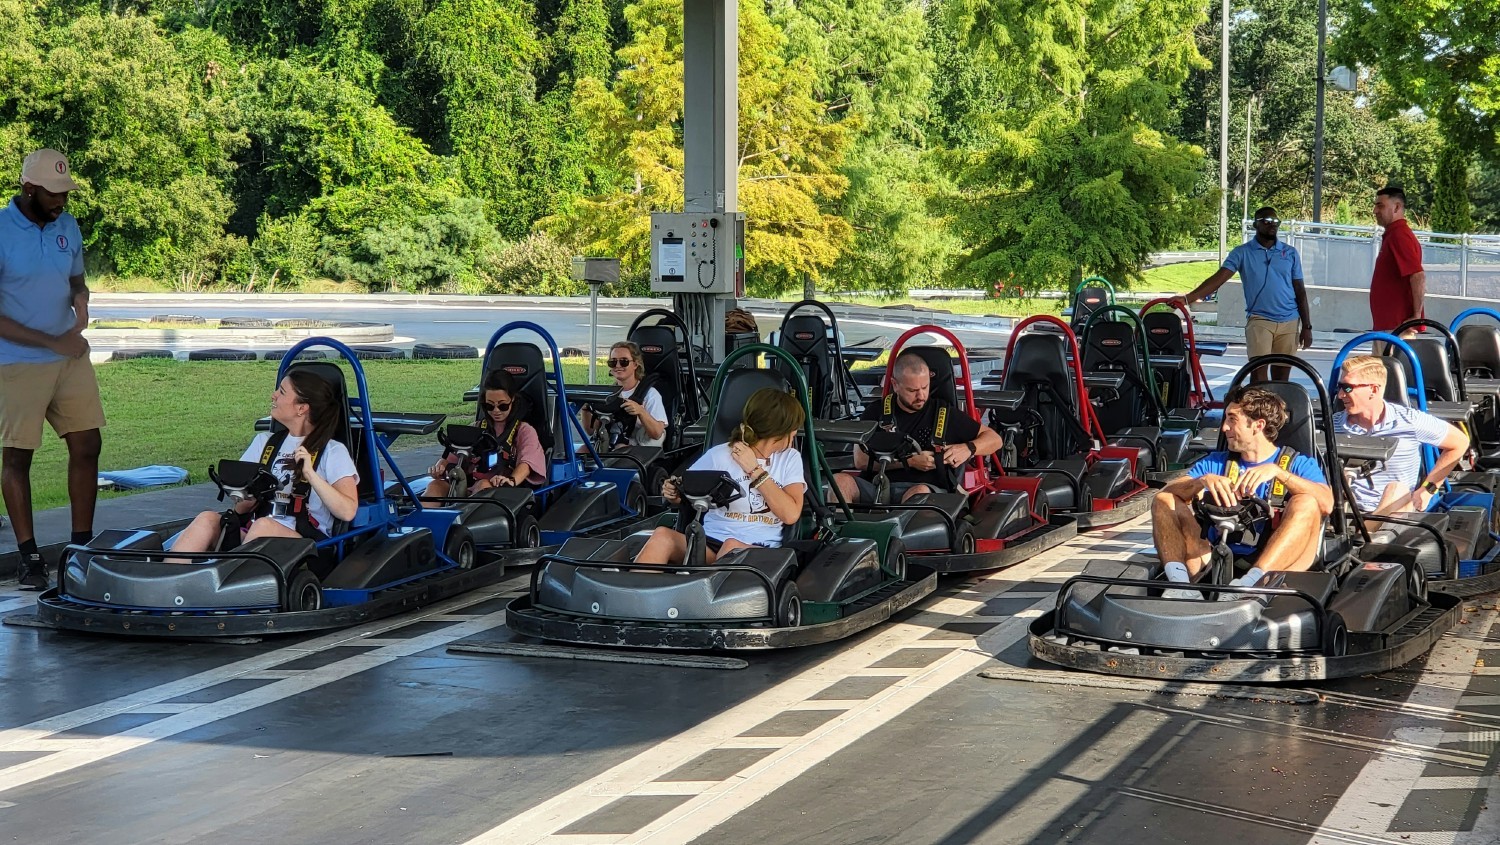 Our Customer Success team building day had a great time racing at a Go Kart track